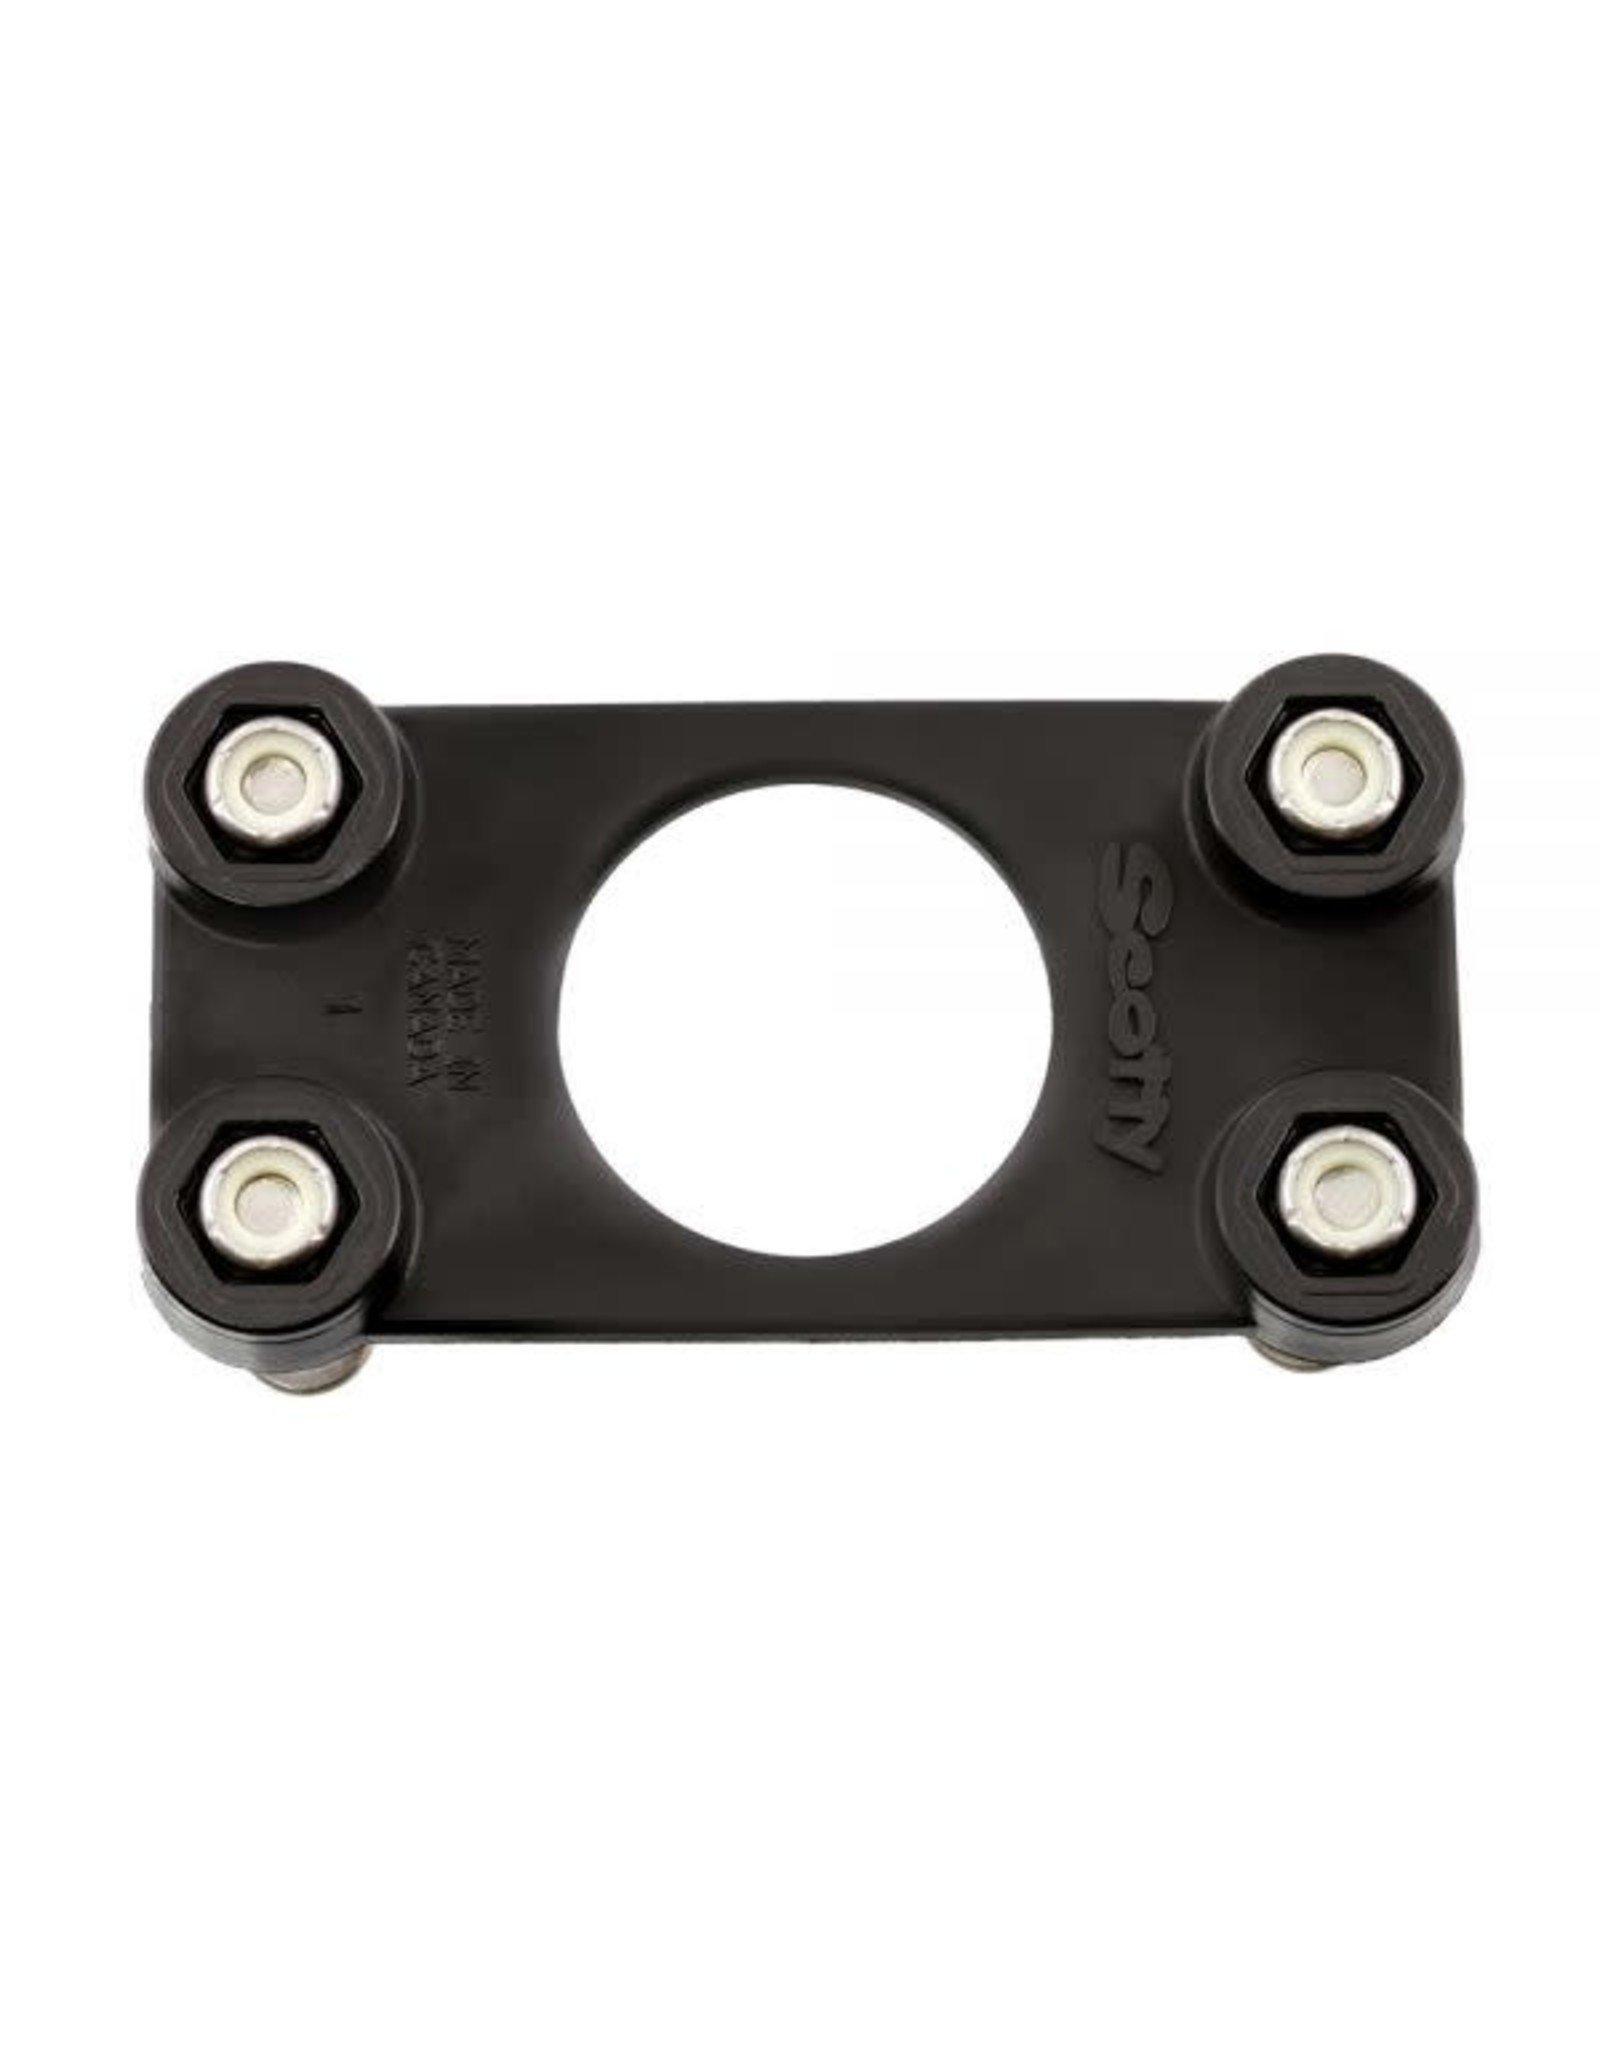 Scotty Backing Plate for 0241 / 0244 Mount - Kayak Junky